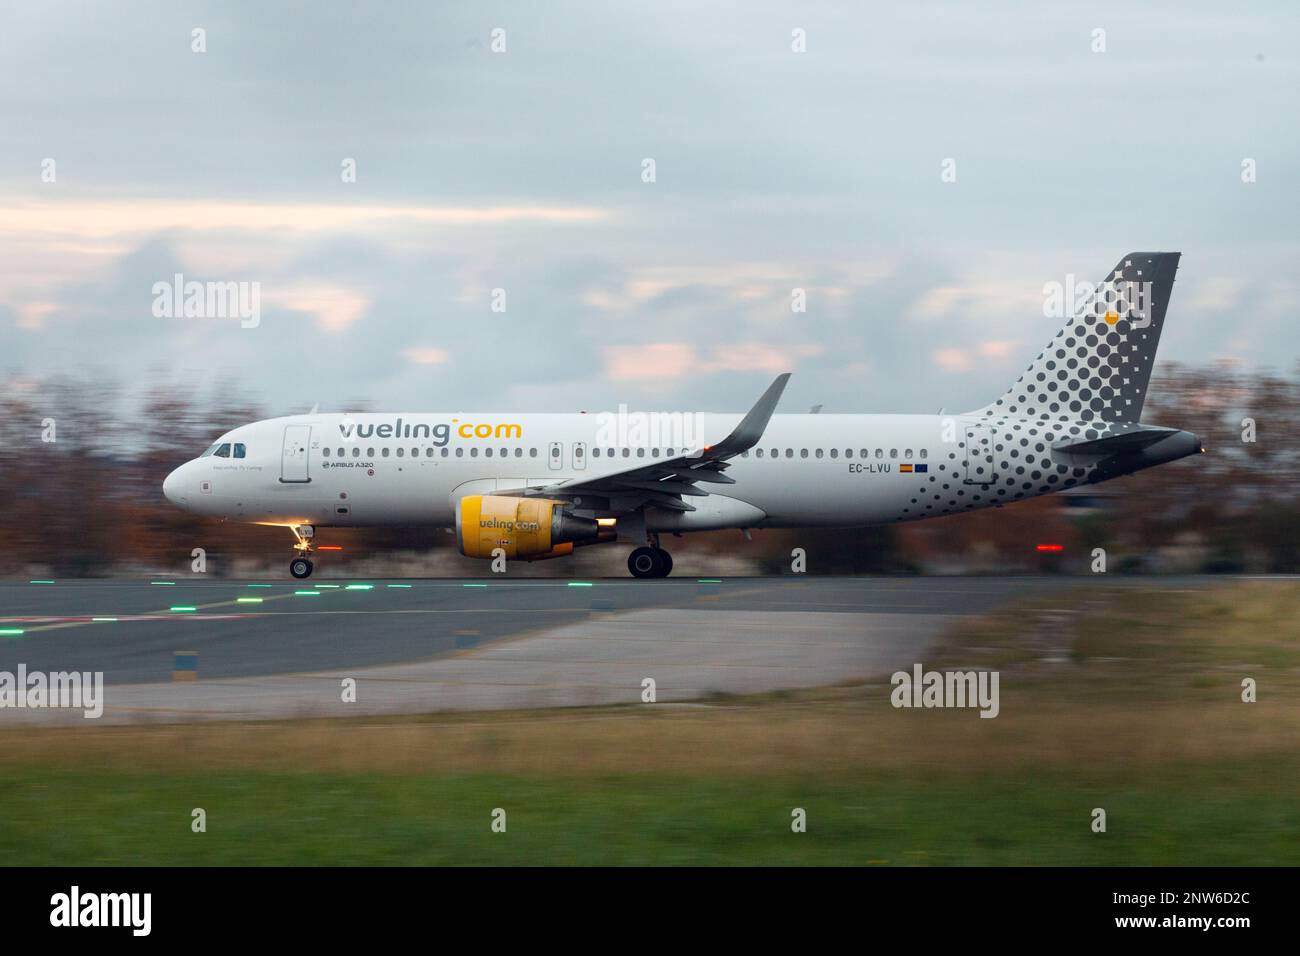 Santander, Spain - December 6, 2022: An Airbus A320 plane of the Vueling company, circulates on the runway of the Seve Ballesteros airport in Santande Stock Photo